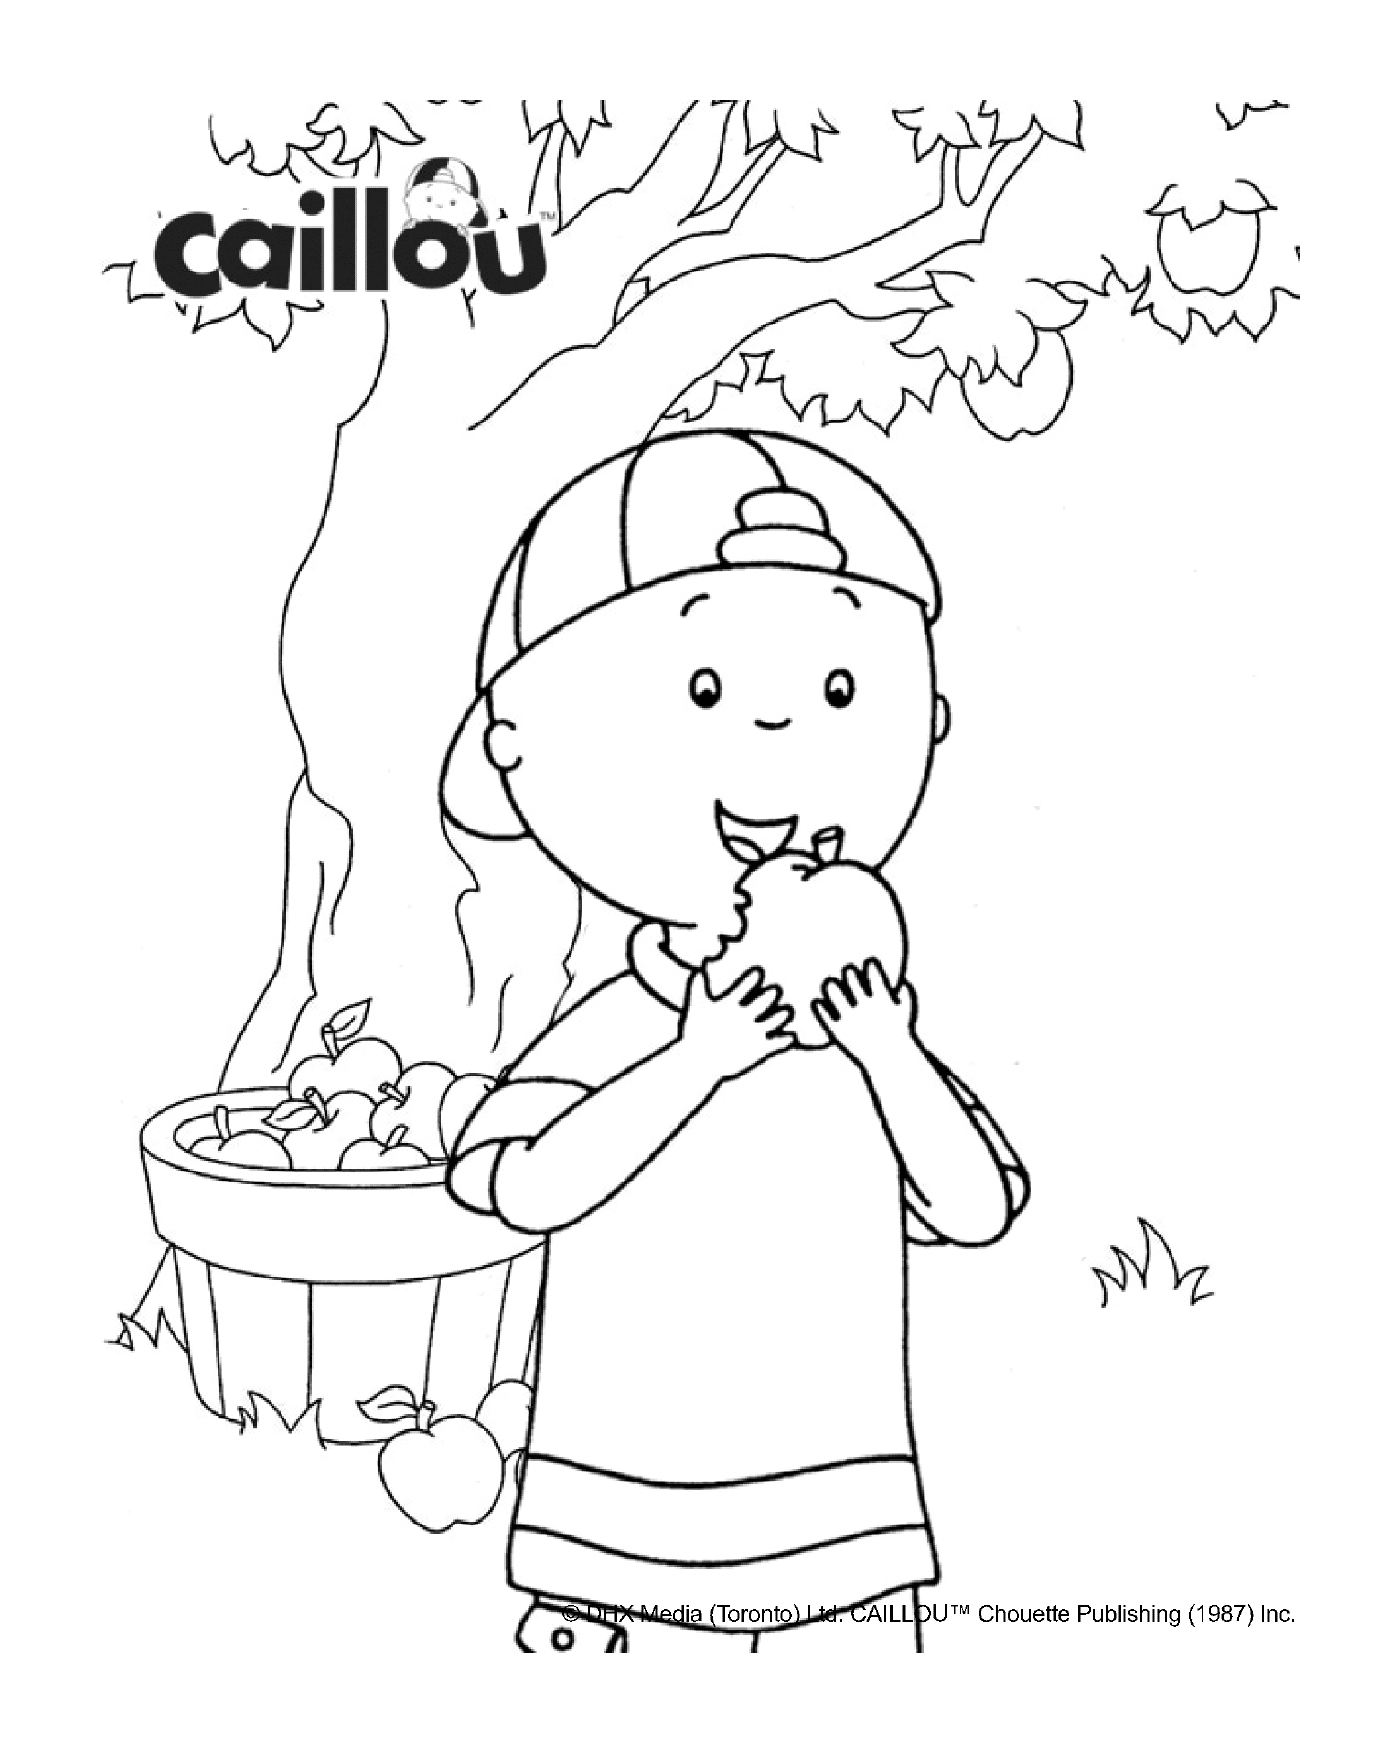  Pick apples with Caillou tasting an apple 